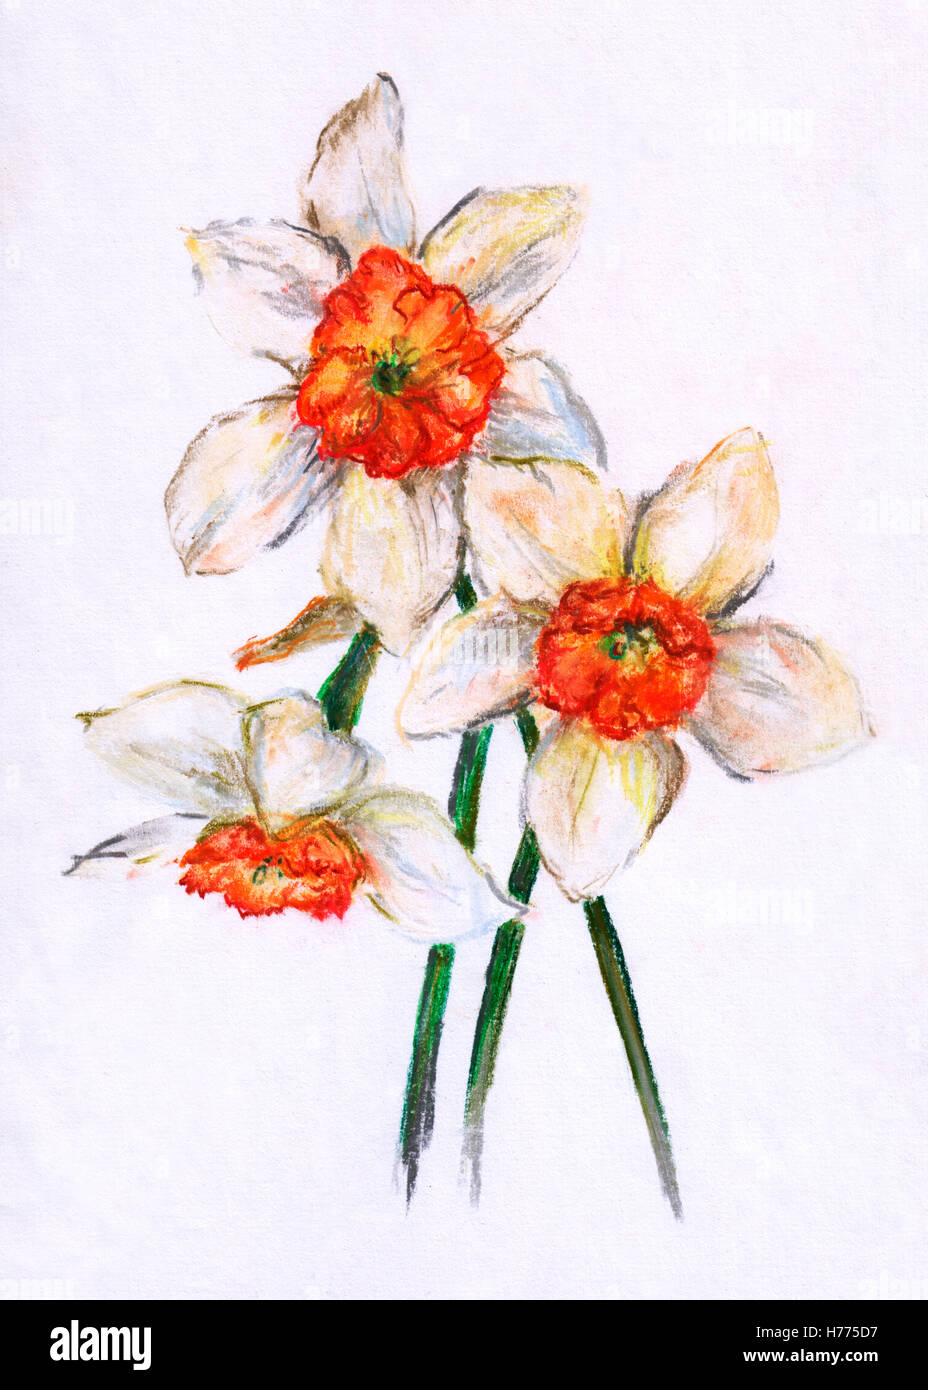 Bouquet of narcissus (daffodils). Pastel drawing on white background. Stock Photo